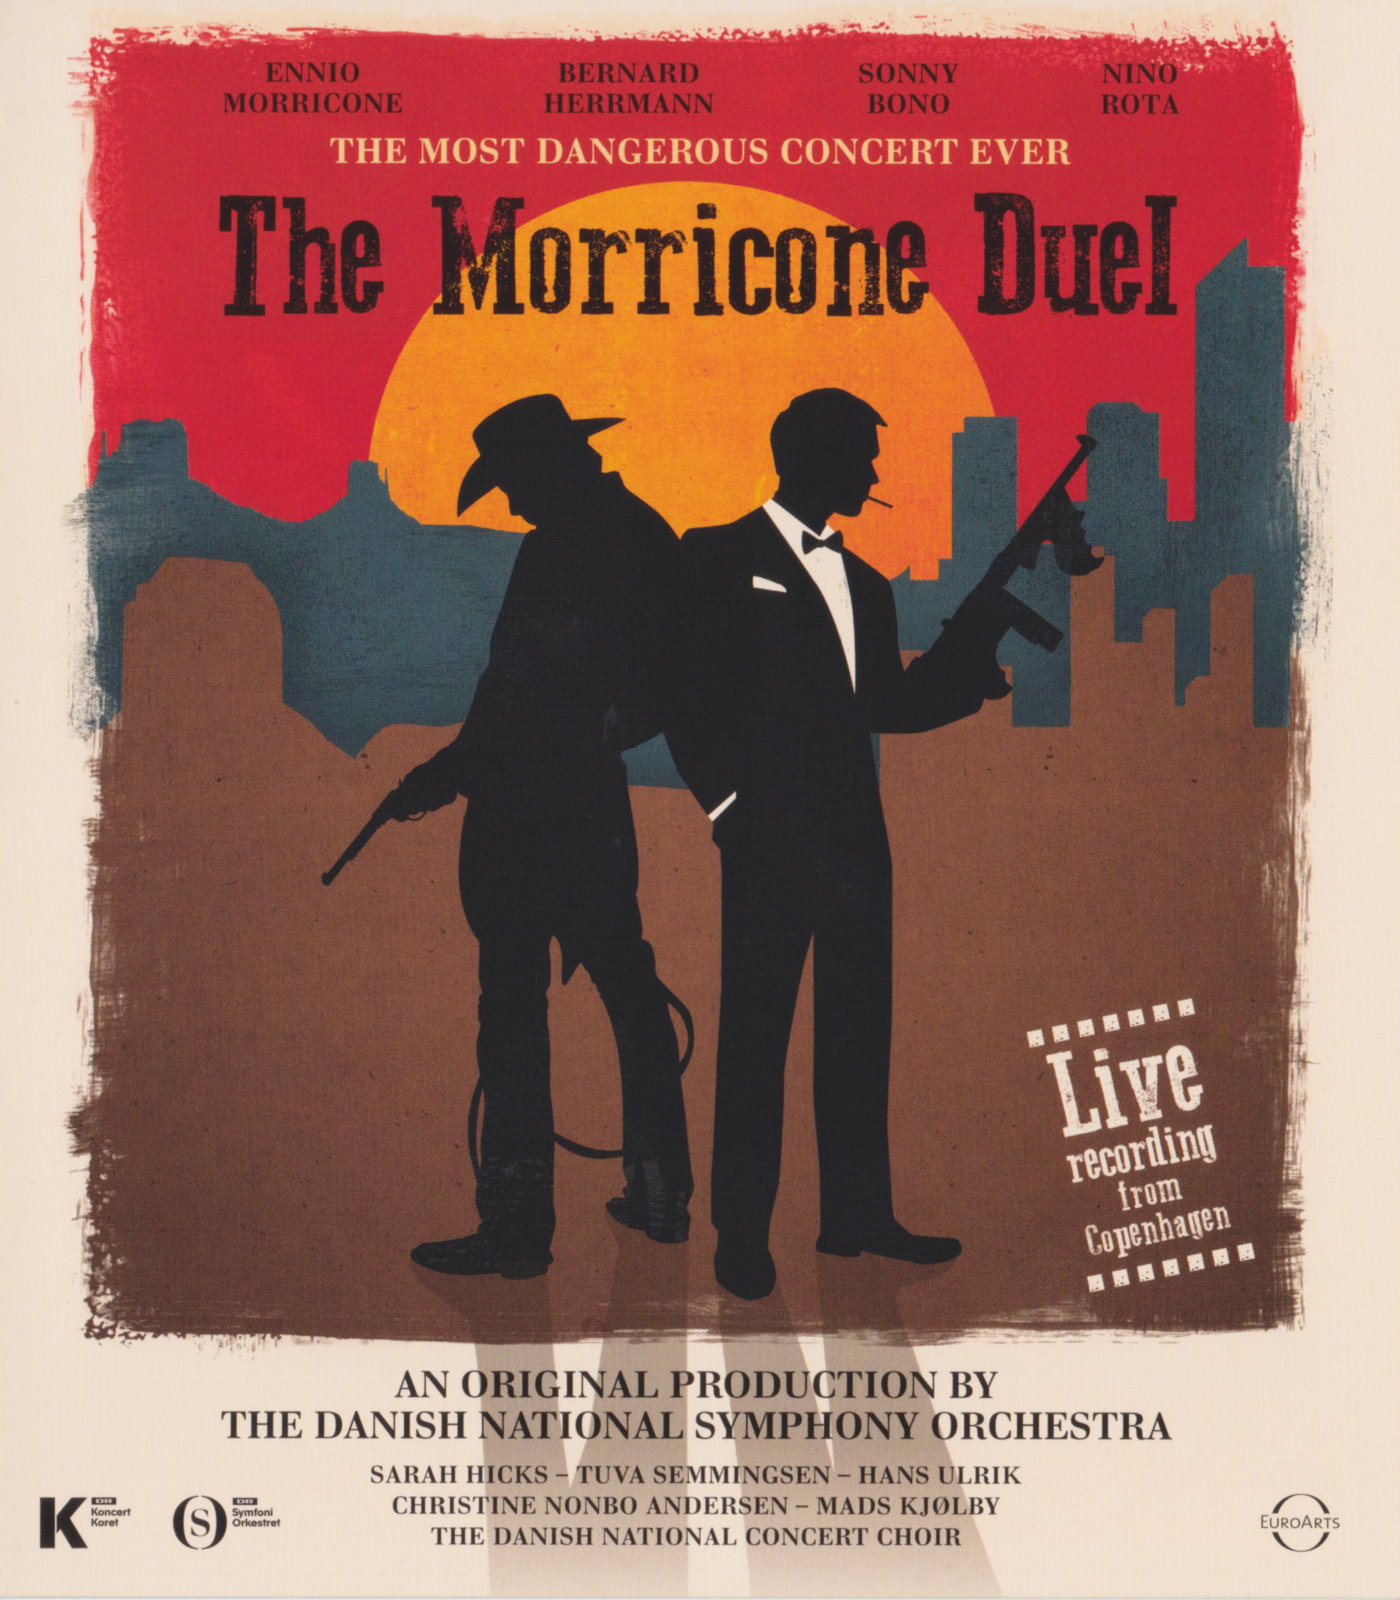 Cover - The Morricone Duel - The Most Dangerous Concert Ever.jpg